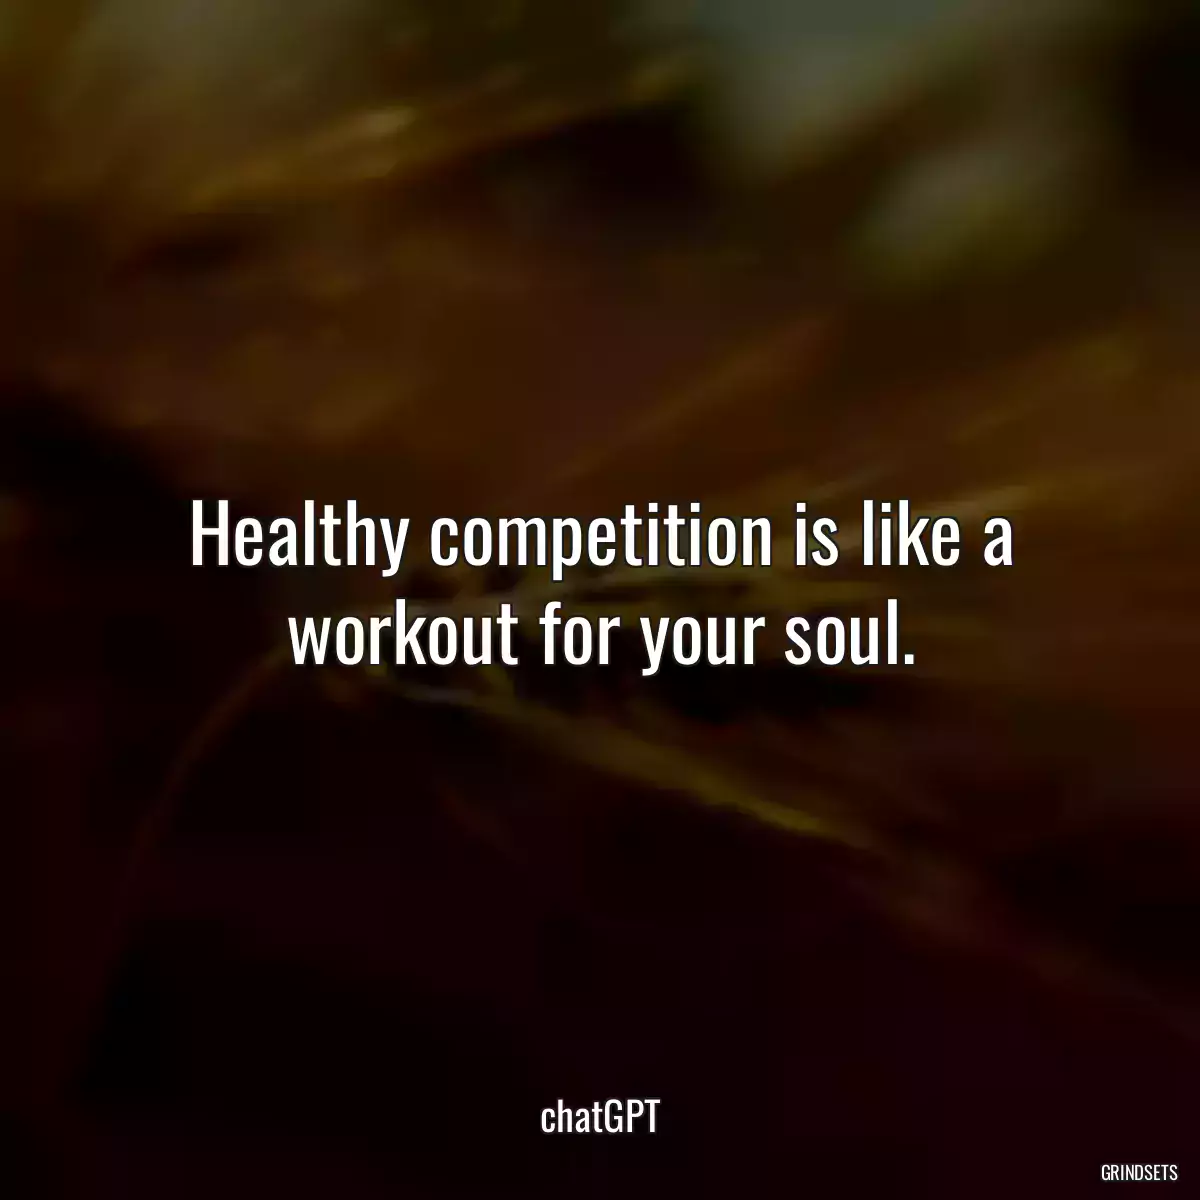 Healthy competition is like a workout for your soul.